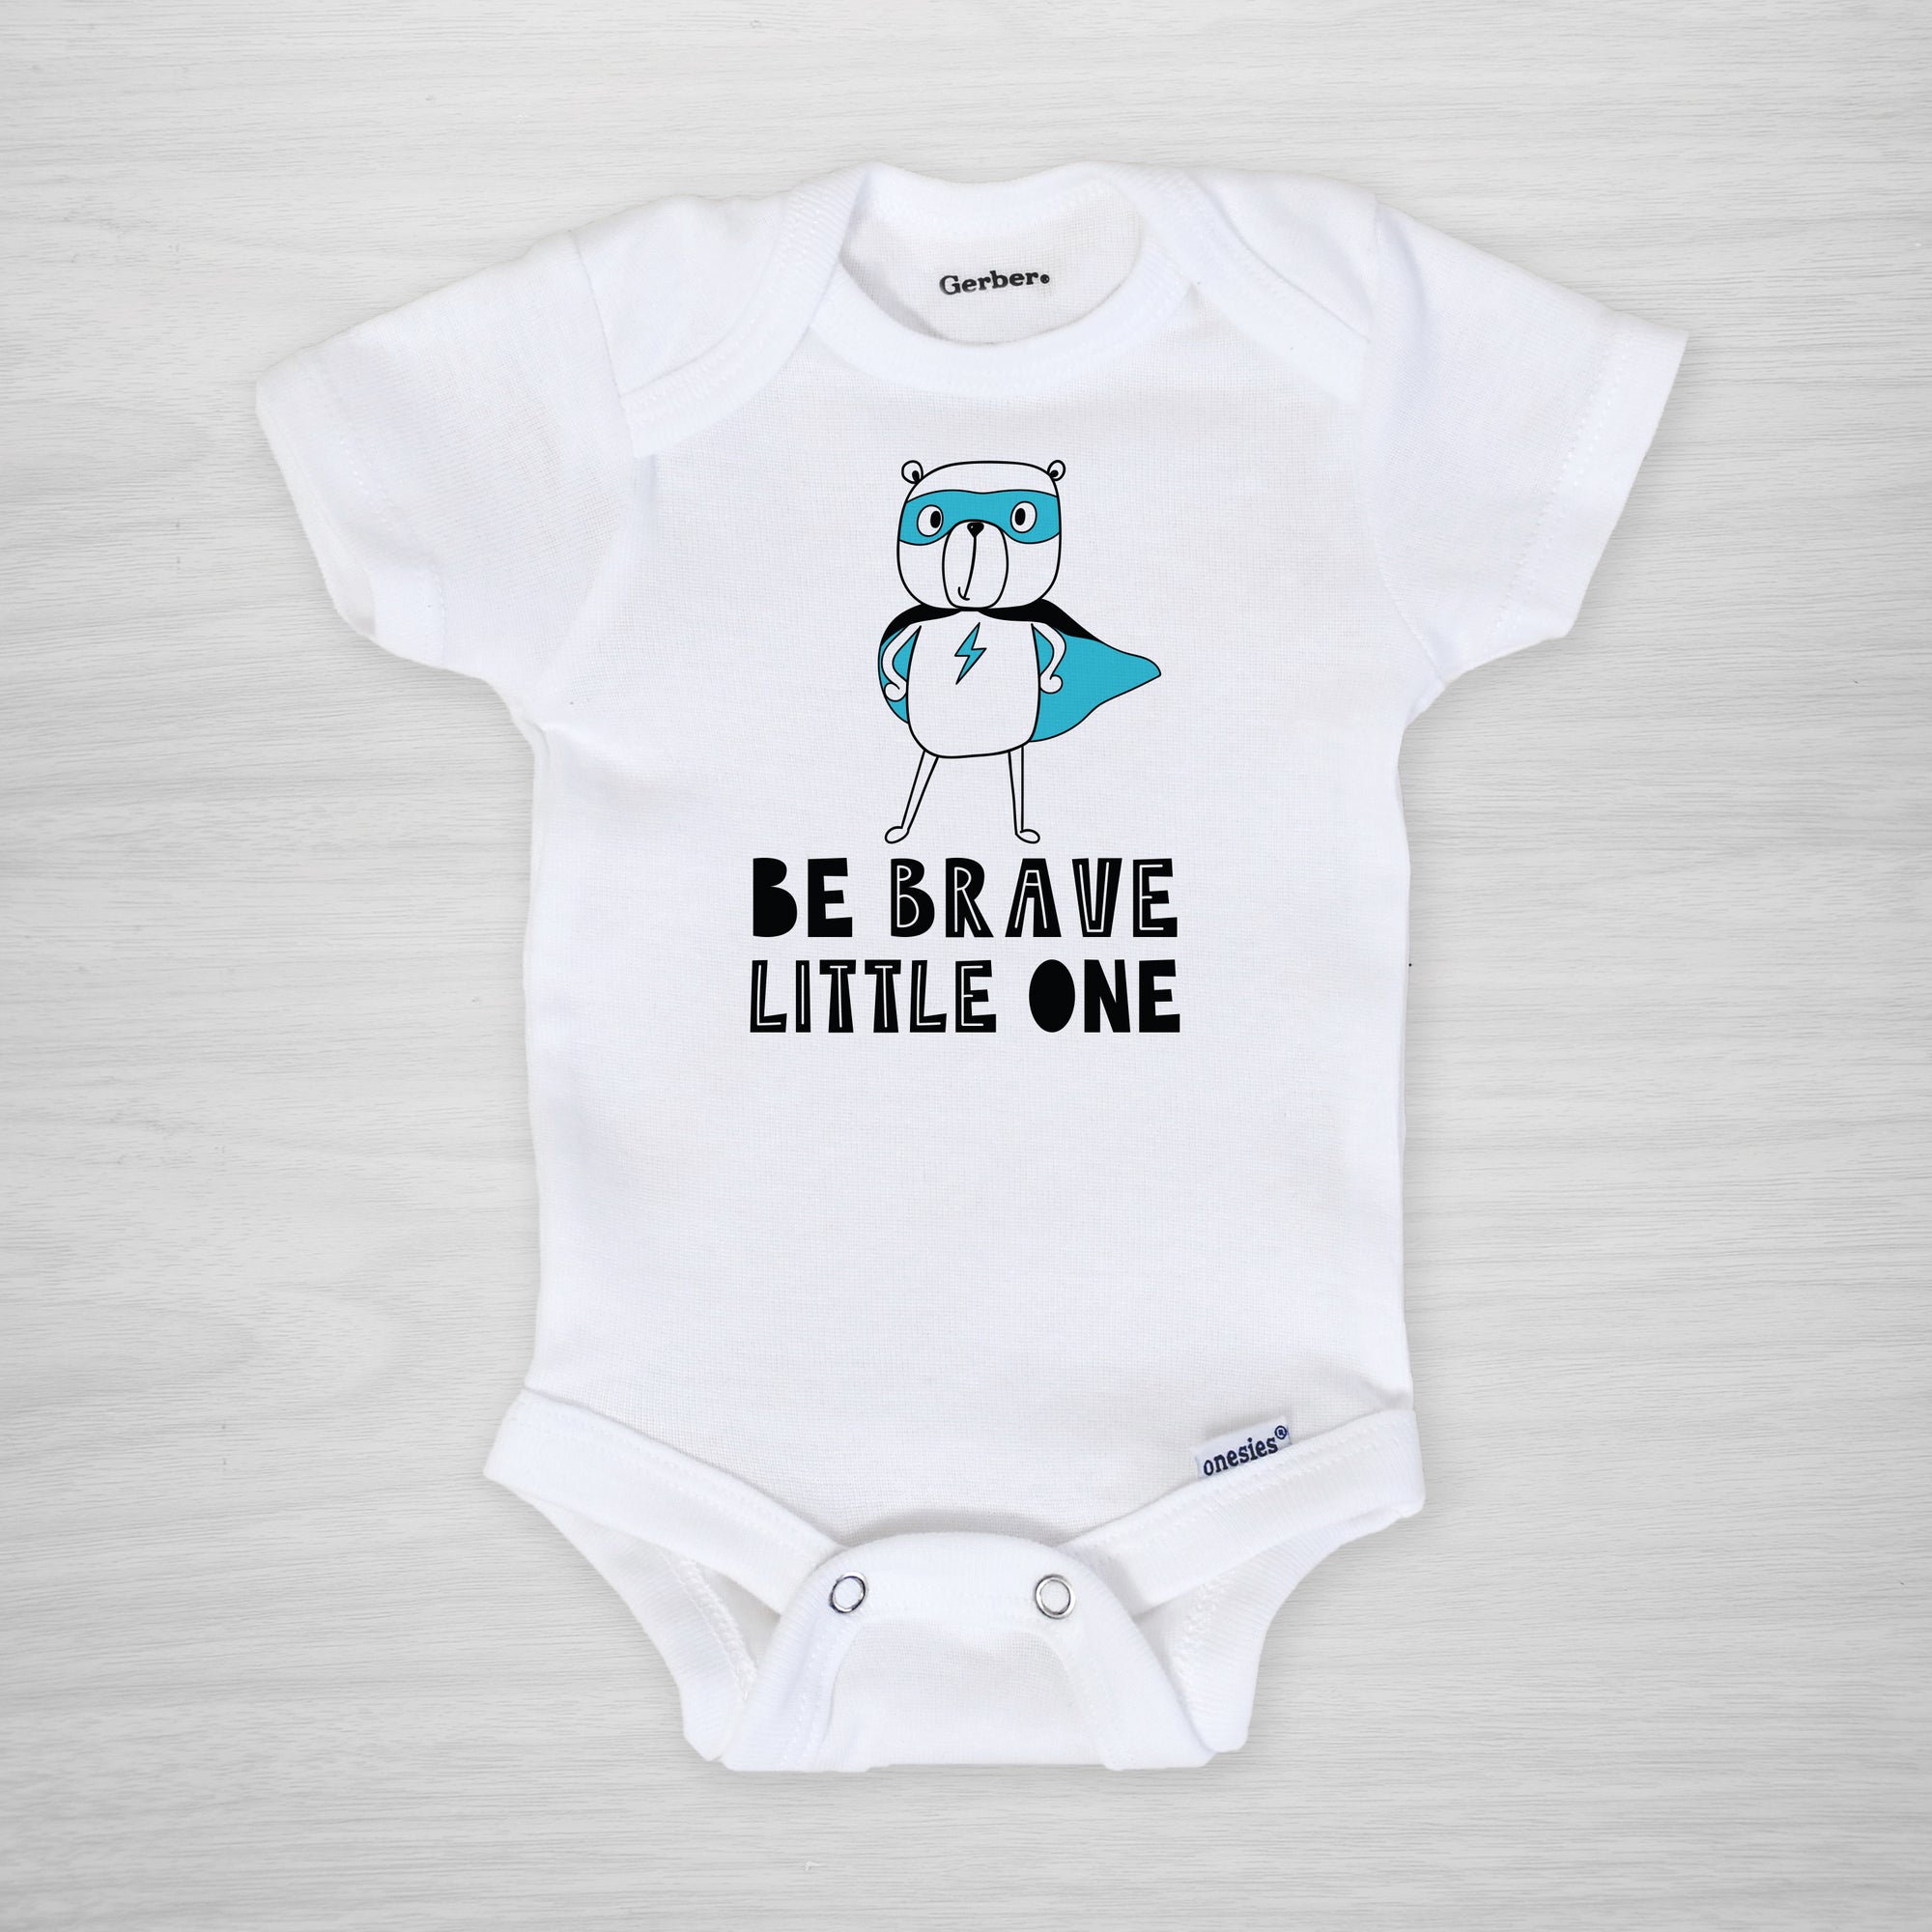 Be Brave Little One Onesie®, with a blue superhero bear, show how brave your little NICU warrior is during his hospital stay, long sleeved